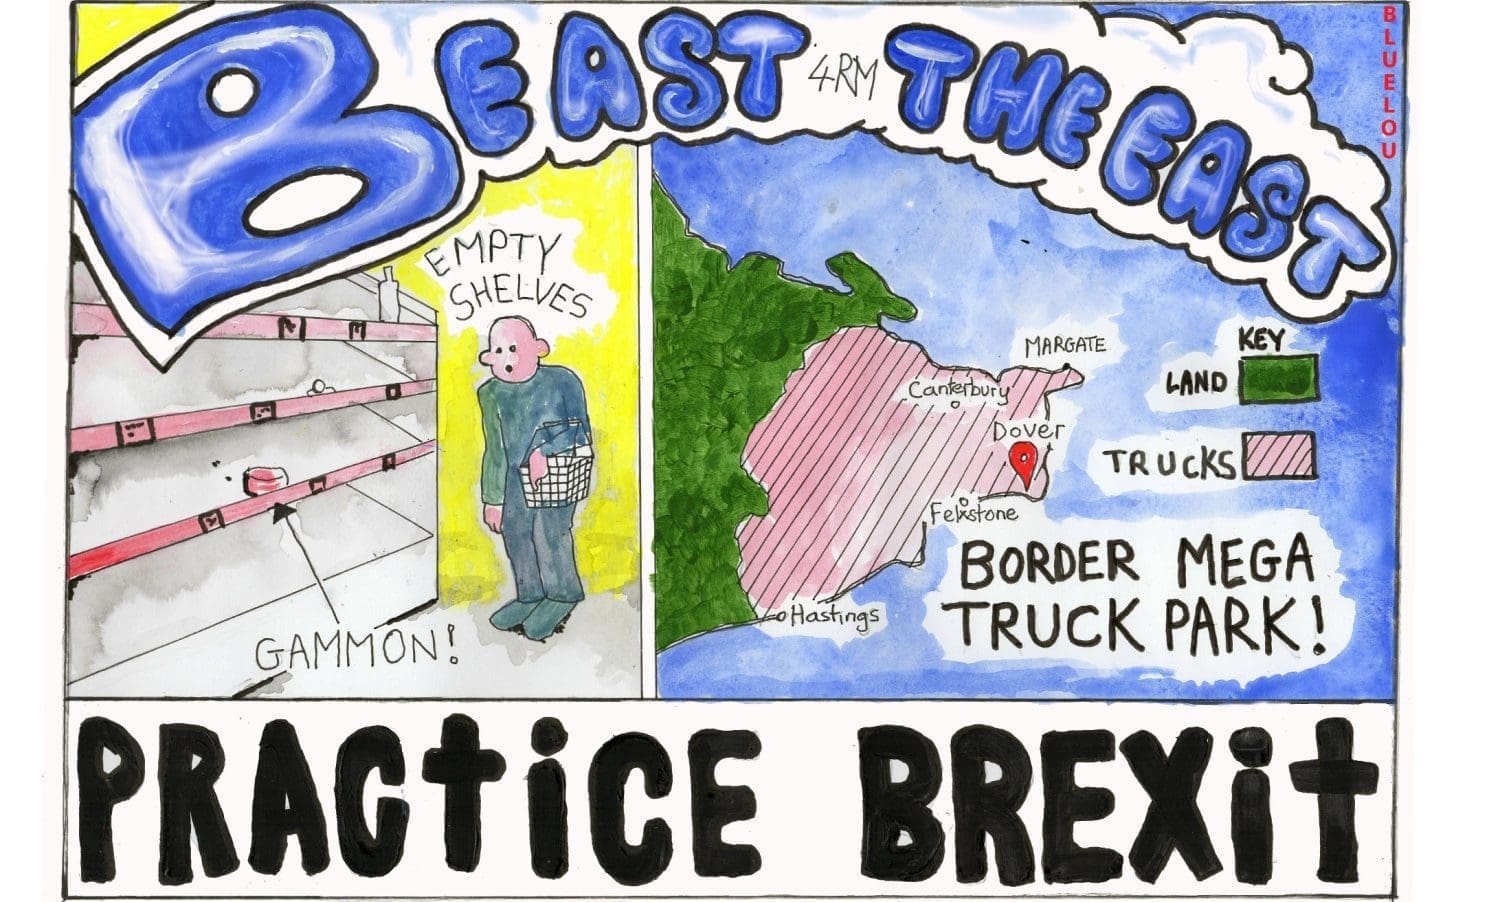 Practise Brexit [CARTOON] | The Canary2183 x 1312